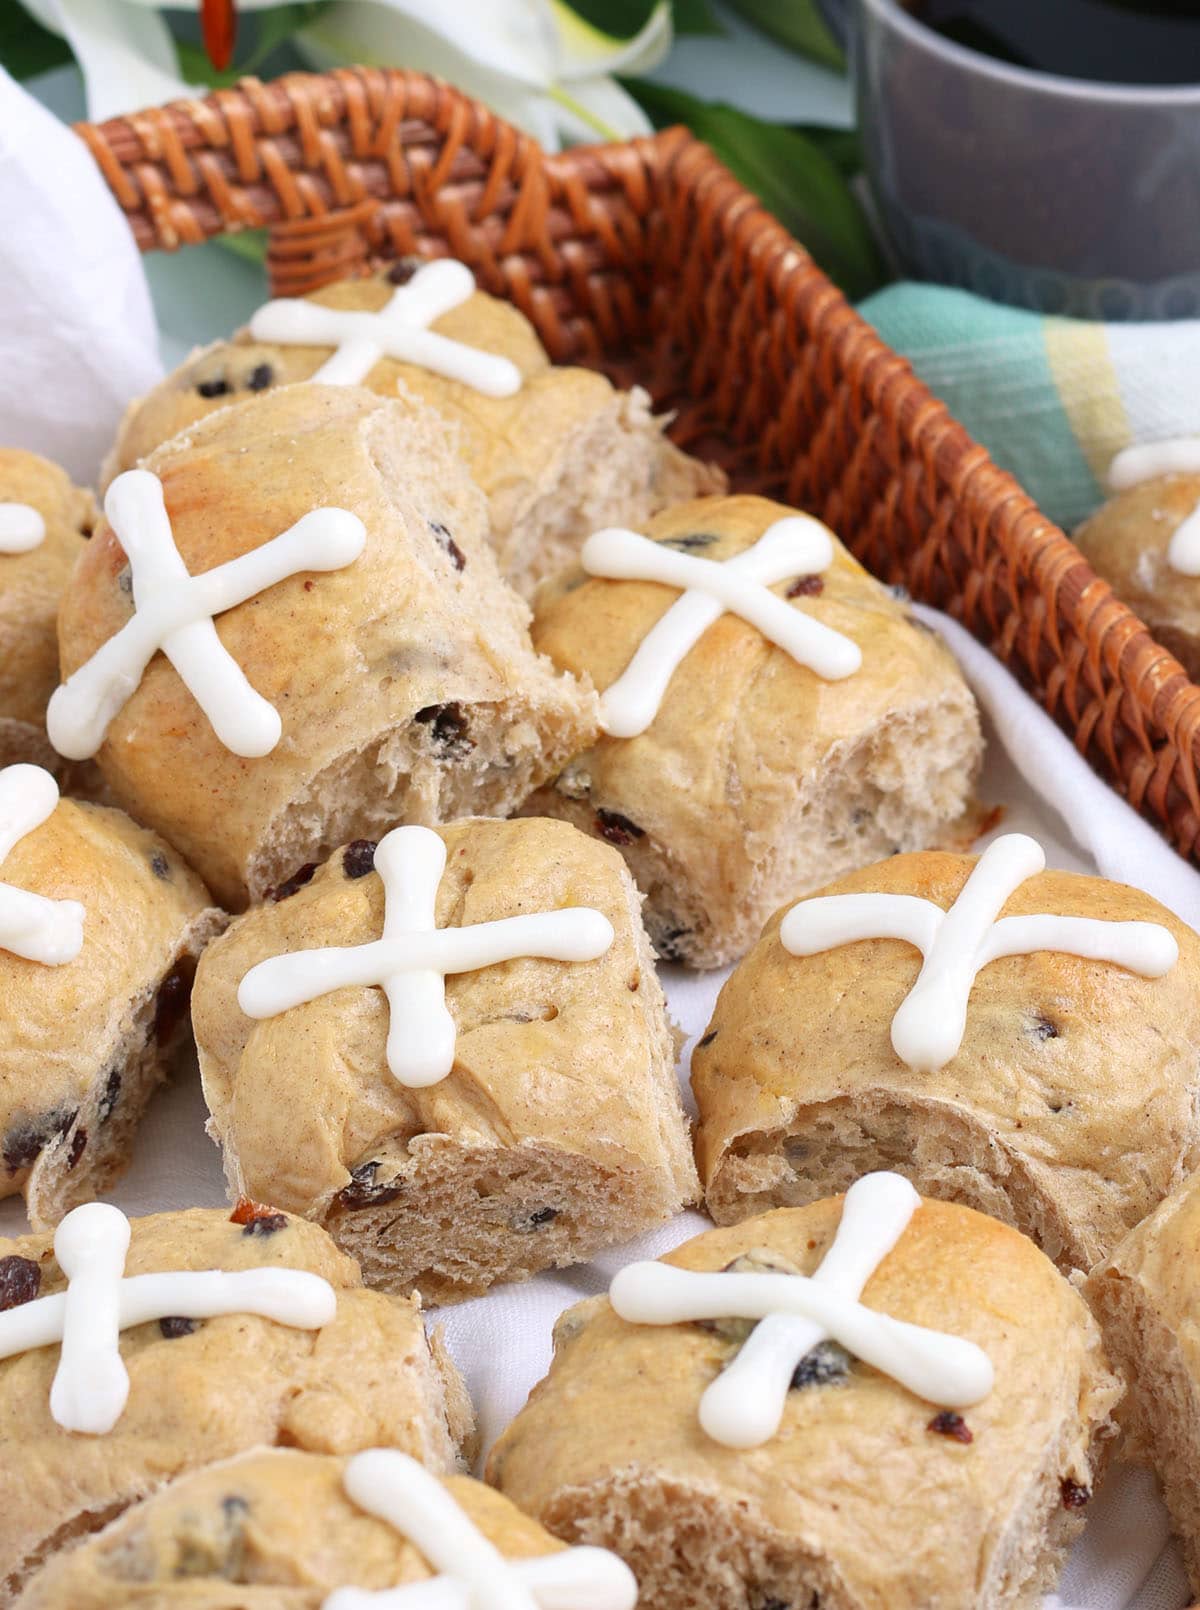 Hot Cross buns in a wicker tray with a cup of coffee in the background.